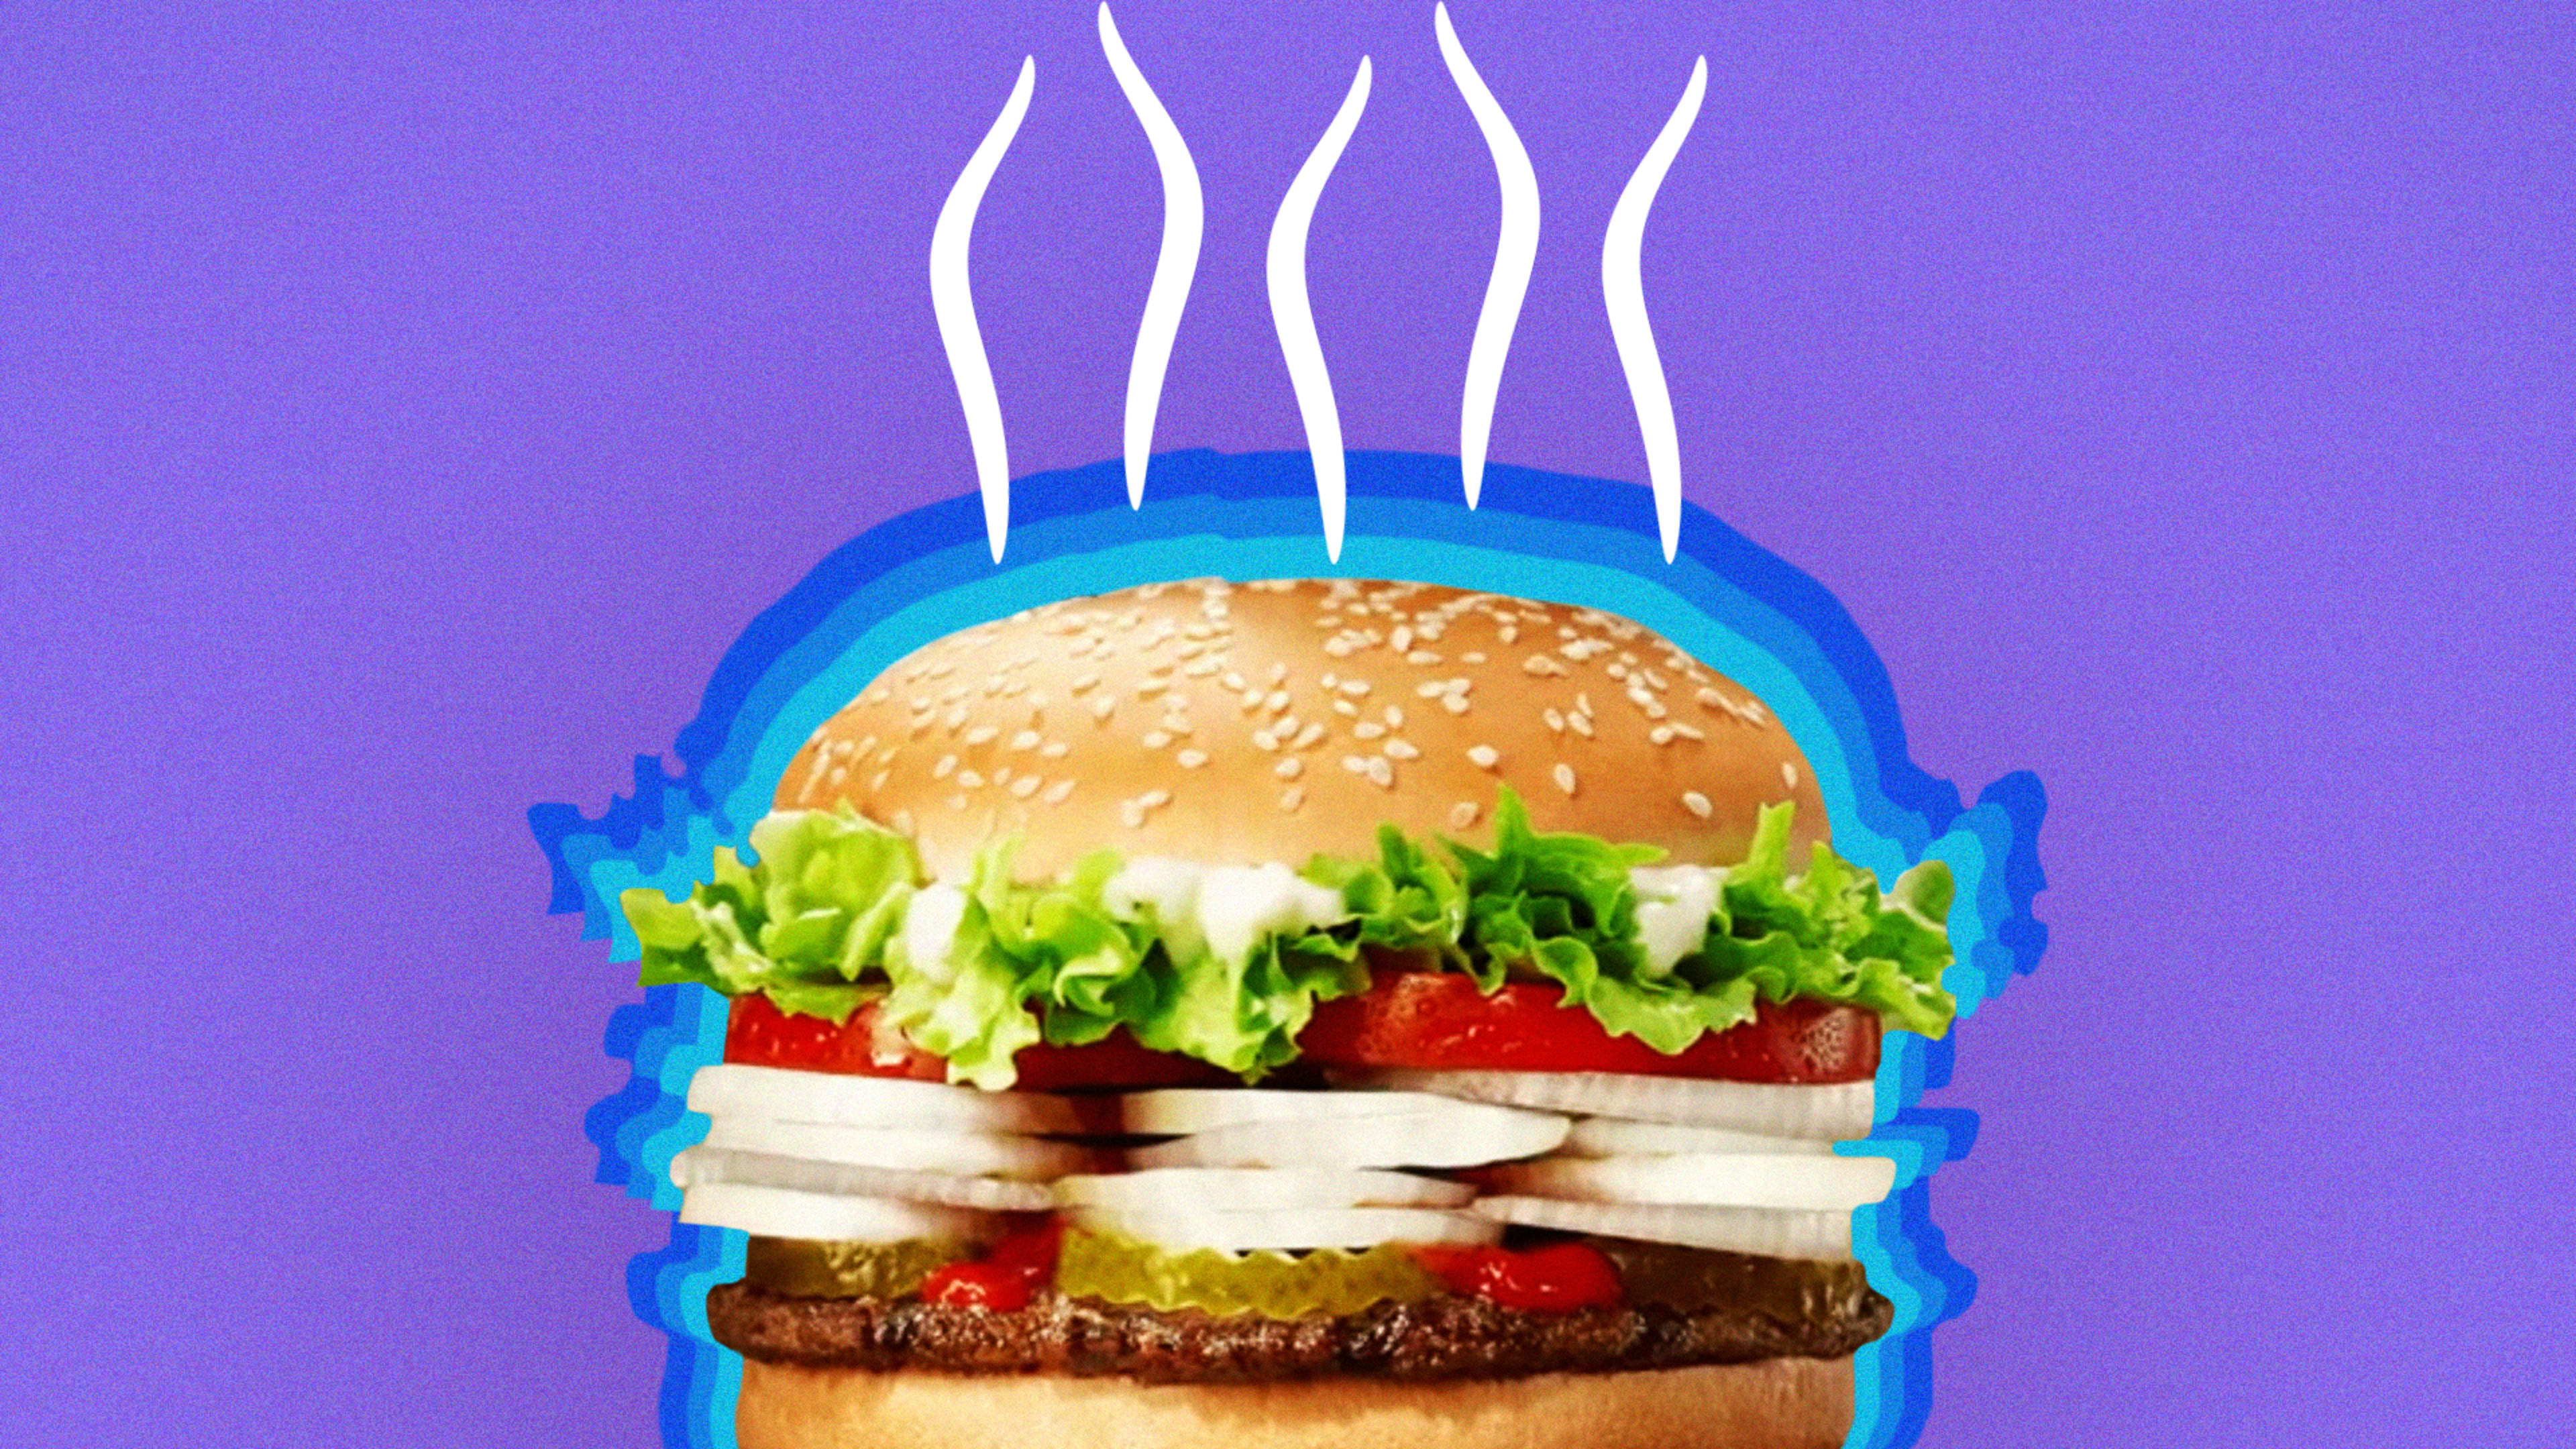 Burger King uses extra onions to equip The Whopper for social